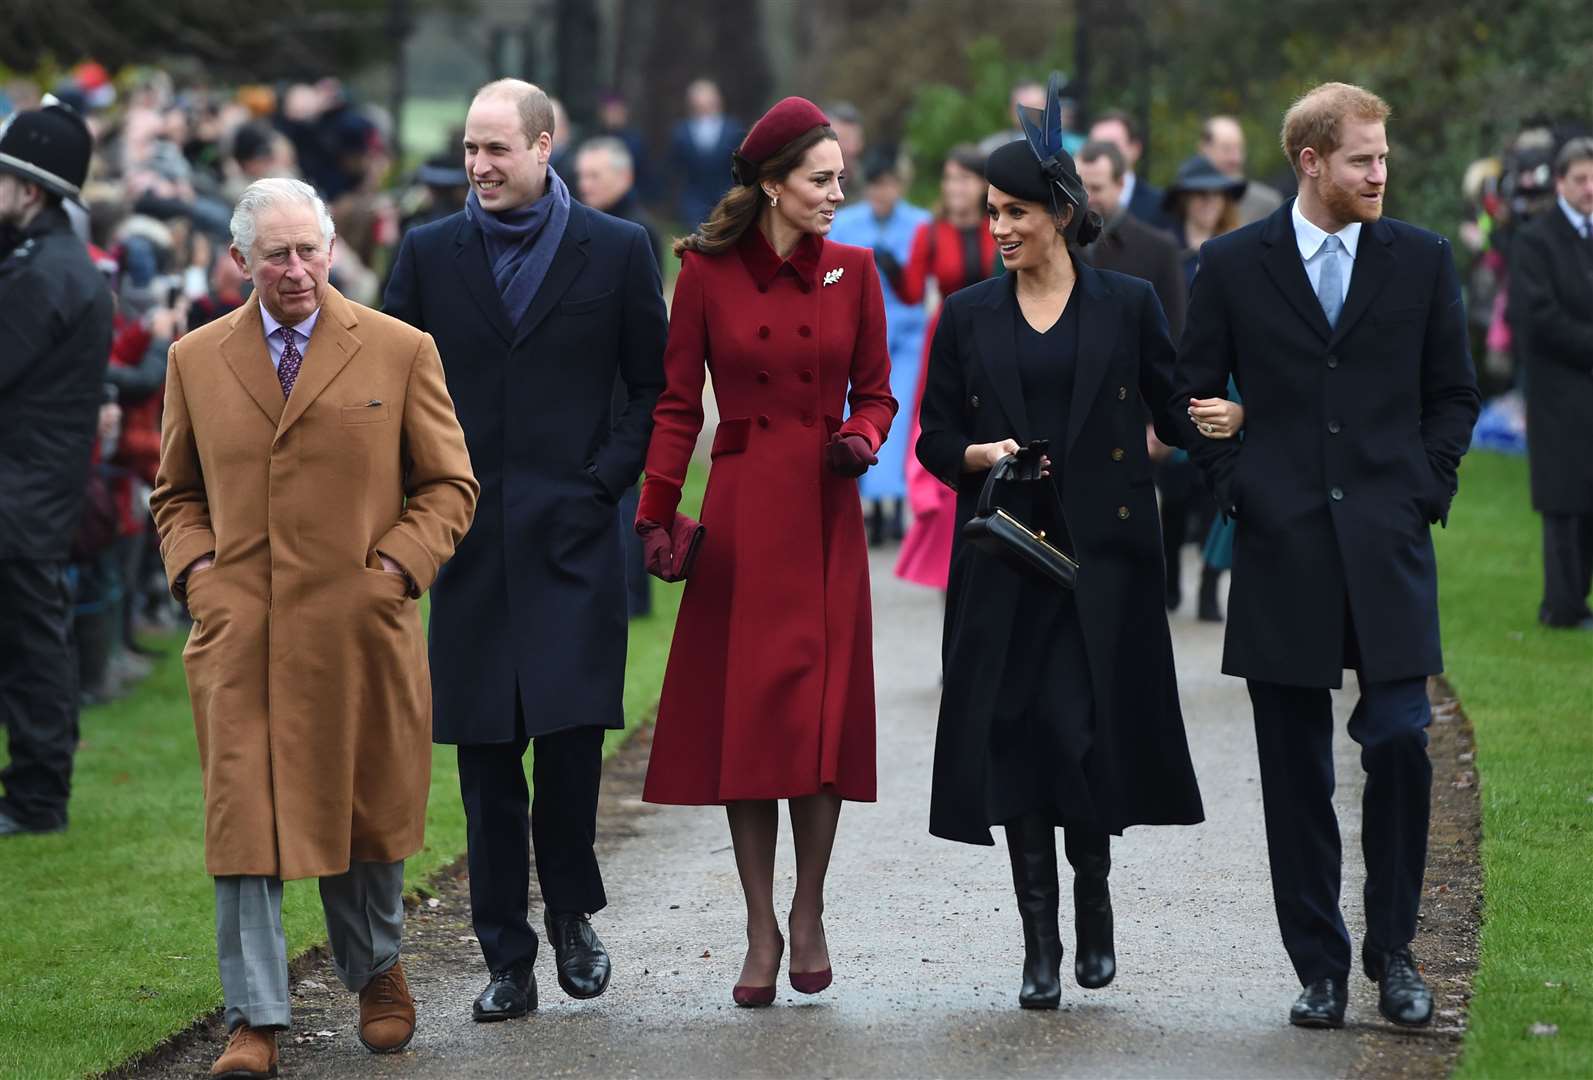 Members of the royal family attend a Christmas Day church service at St Mary Magdalene Church in Sandringham, Norfolk (Joe Giddens/PA)